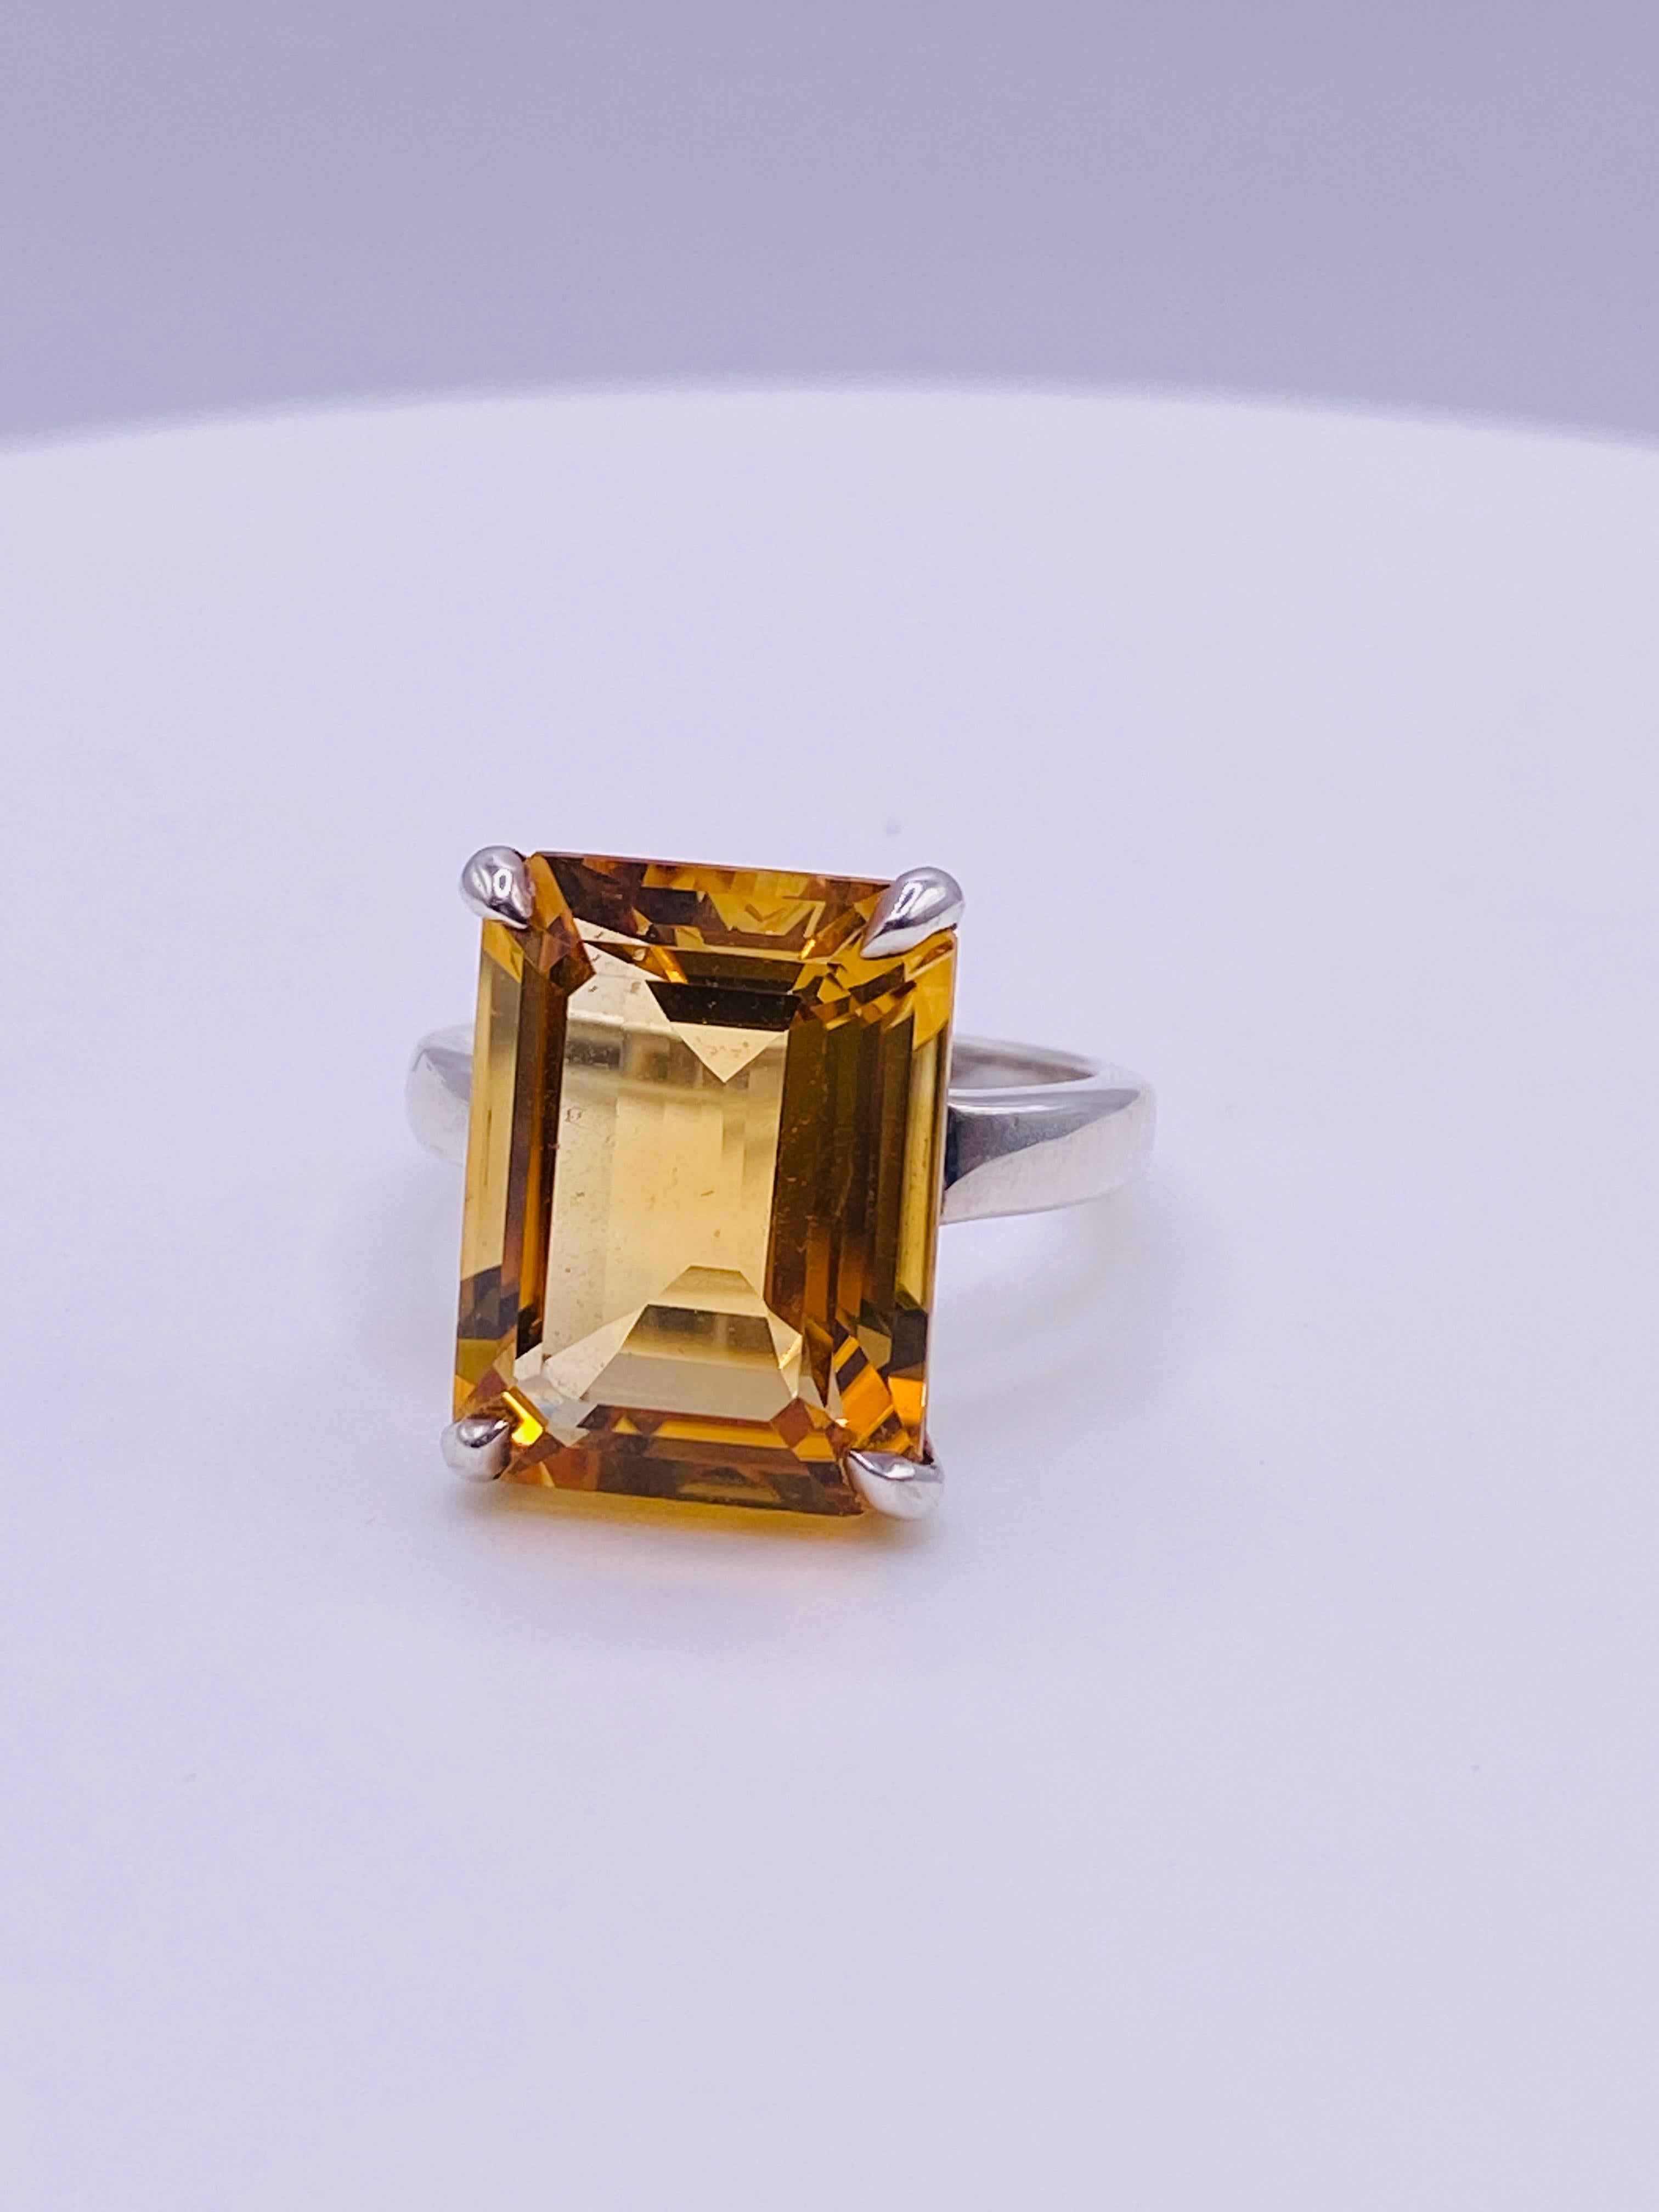 Tiffany & Co. 925 sterling silver citrine ring, sz 6. Stone measures 11.8 mm x 15.8 mm. 4.0Dwt/6.2 gm